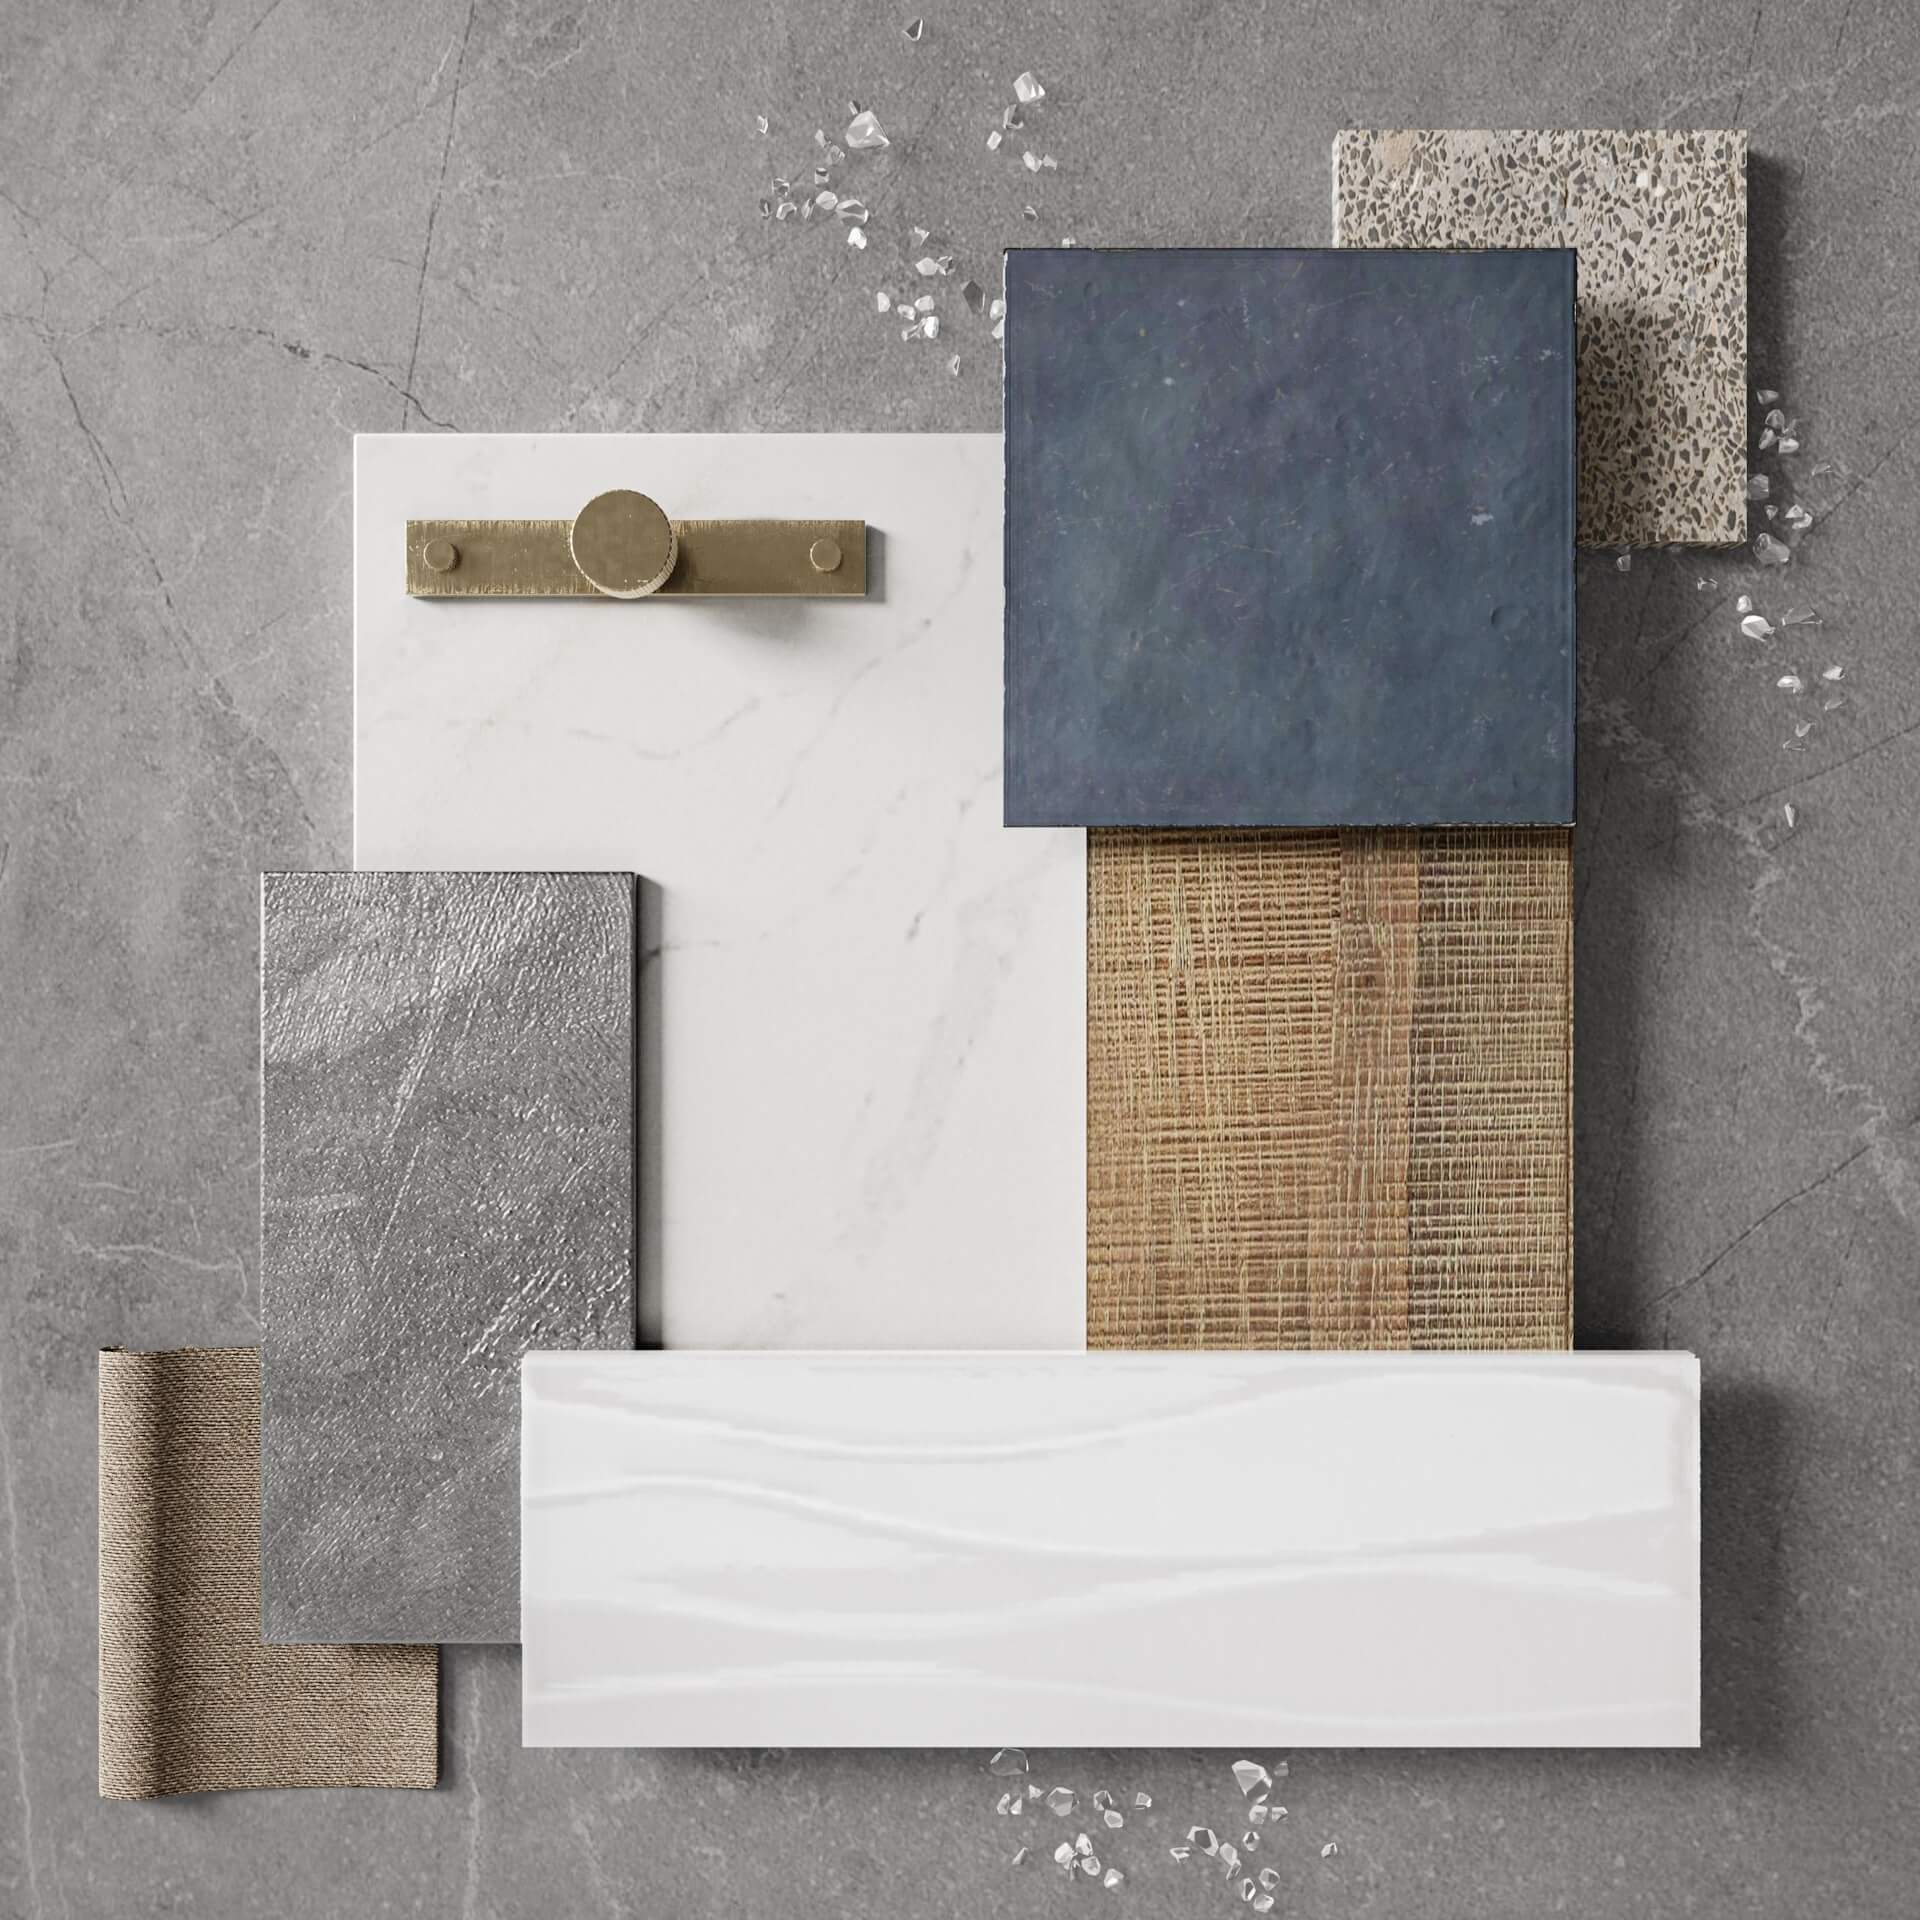 Flat-Lay Shot for Tile Product Options